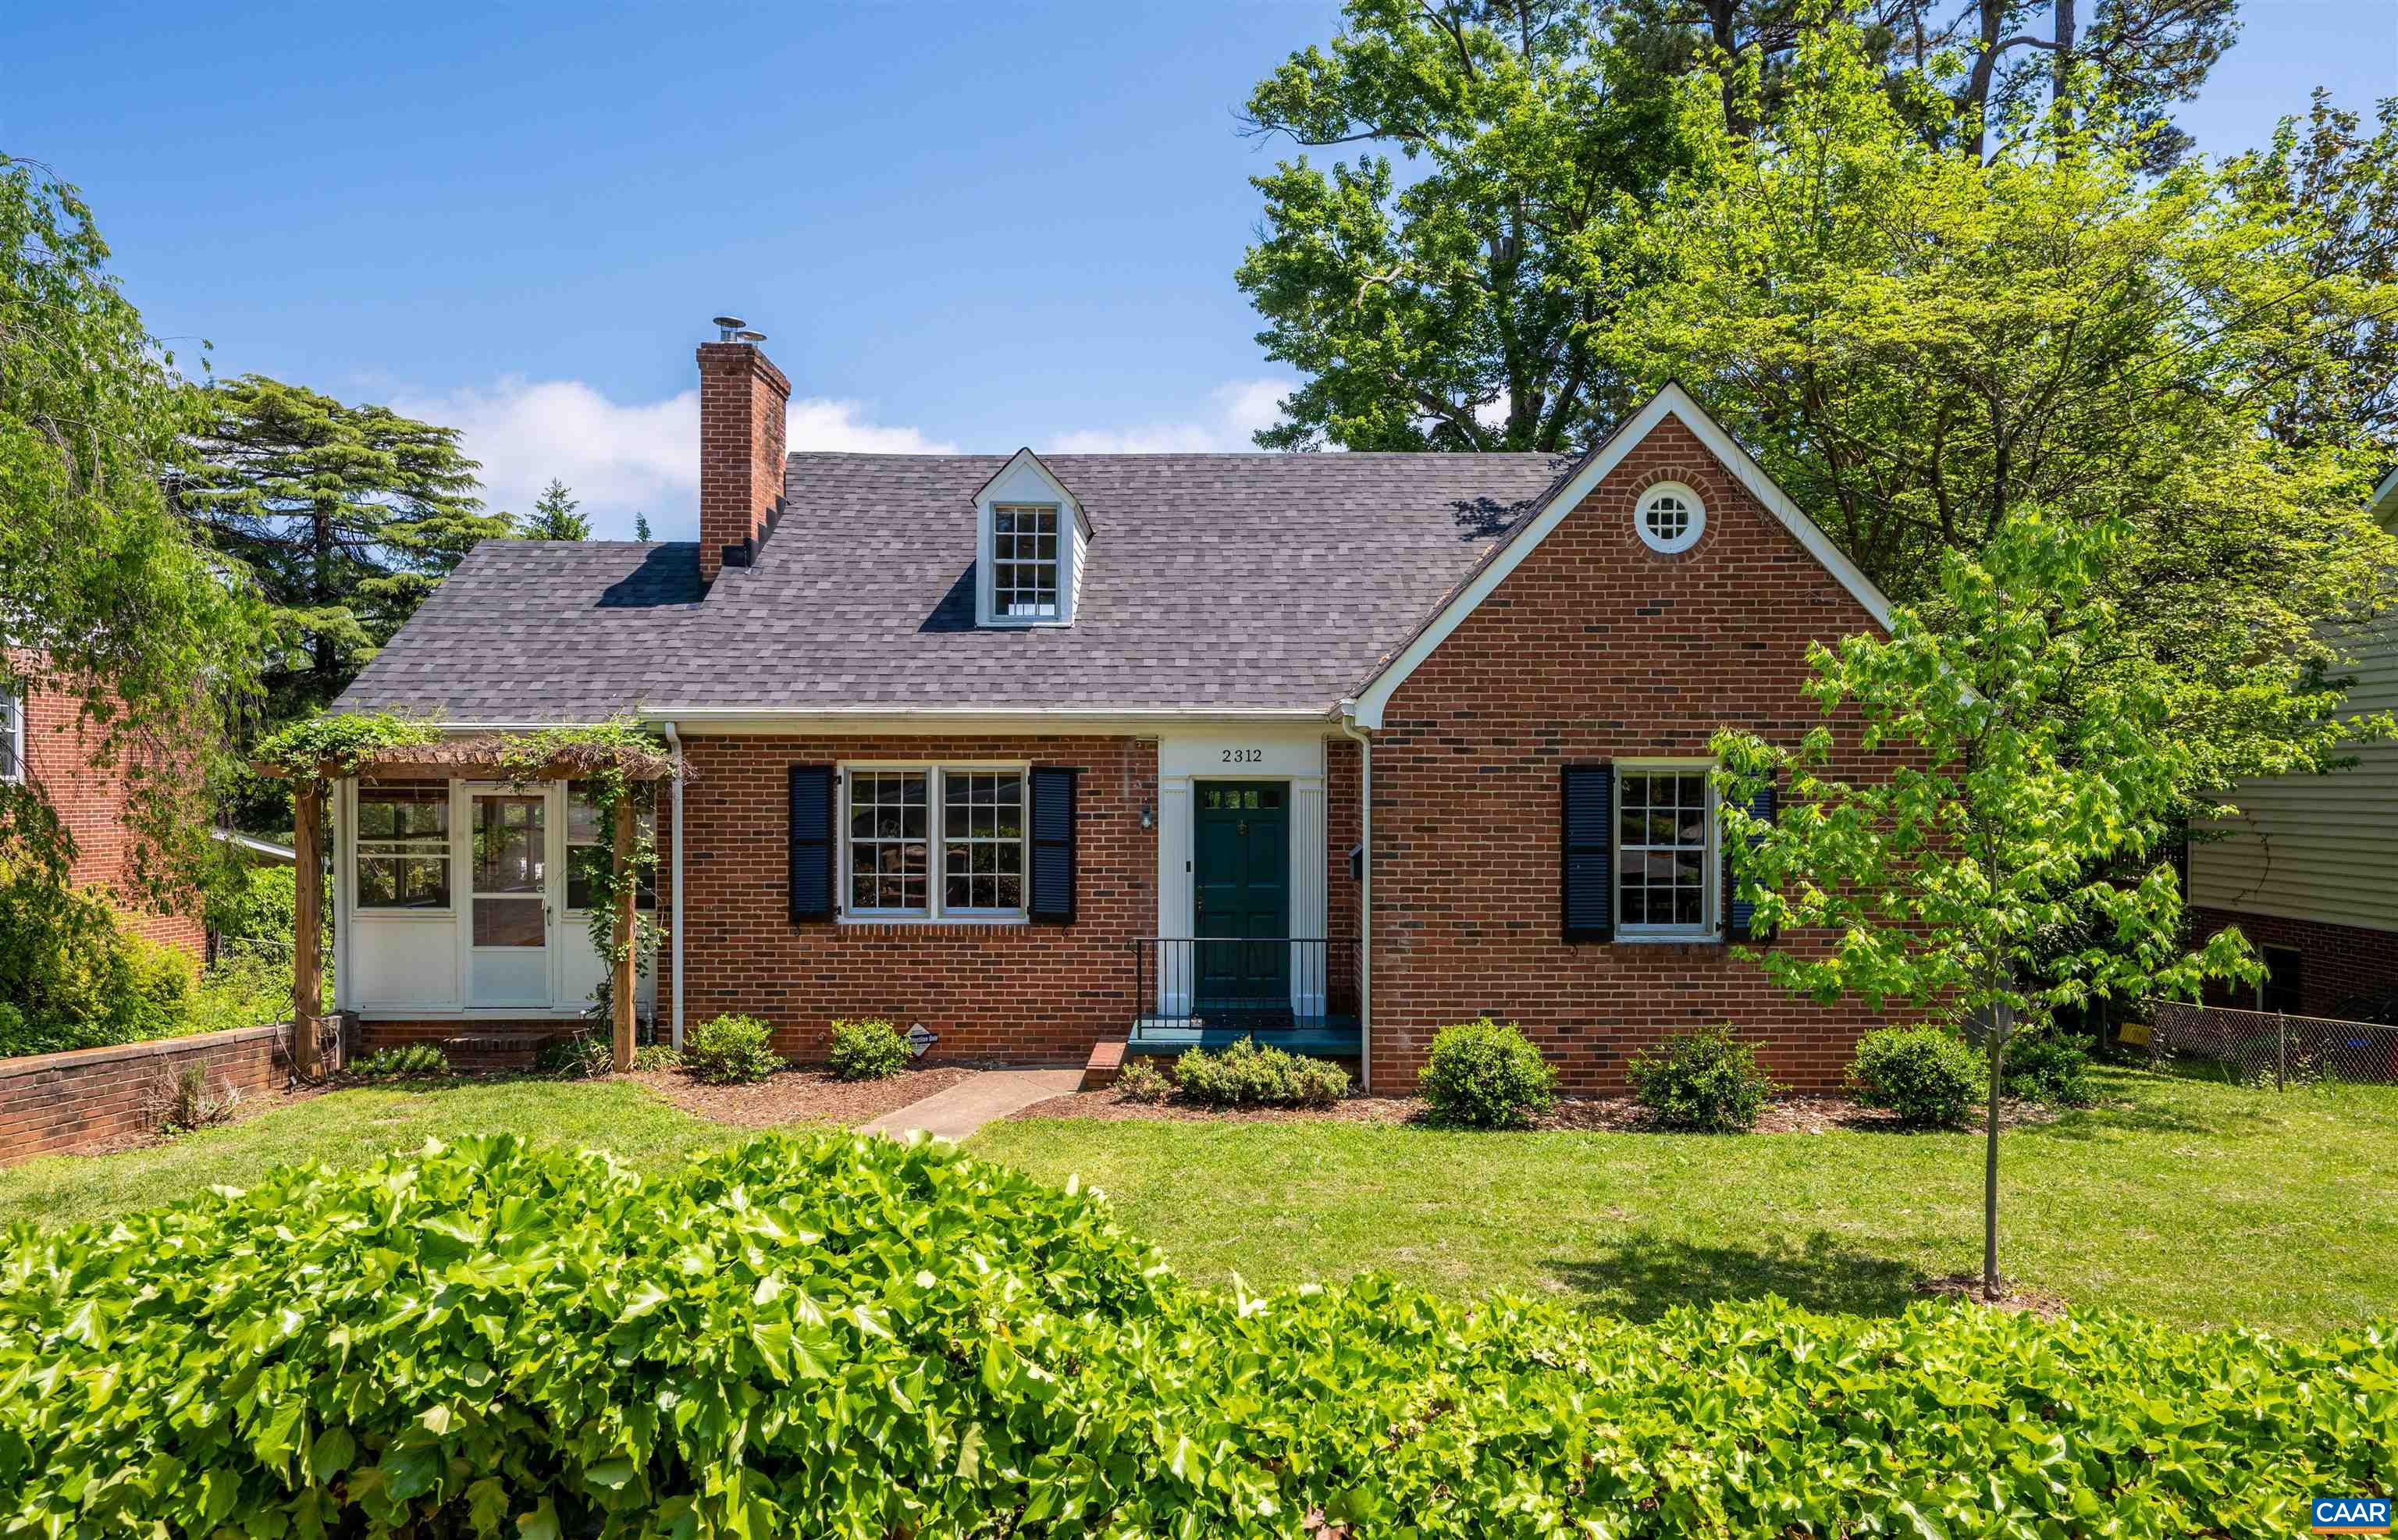 Handsomely updated 5BR, 3 full BA Fry's Spring cape cod-style brick house offering an abundance of custom wood work and charming nooks. Walkable to UVA Grounds and Medical Center, close to Downtown Cville and I64. Lovingly maintained by current owners, wonderful stewards focused on long-term improvements intending to stay for many more years. Enter the inviting living room with wood-burning fireplace (fully stocked wood pile conveys) which connects to 3-season screened sunroom overlooking the rear fenced yard (with separately fenced garden spot). At the back of the house is the DR and renovated kitchen which opens onto cozy screened porch (dog door included!), with steps down to rear yard, complete with custom stone patio and fire pit. Two bedrooms and full bath with tub/shower on the main level, second floor complete with expansive primary bedroom, remodeled full bath and fourth bedroom with special reading nook hideaway! Finished basement noted as 5th bedroom but could offer revenue stream as walk-out efficiency apartment, with top-to-bottom renovation completed May 2022. Other recent improvements include 2021 30-yr architectural shingle roof, 2021 high SEER HVAC, interior paint, R30 attic insulation, extensive tree maintenance.